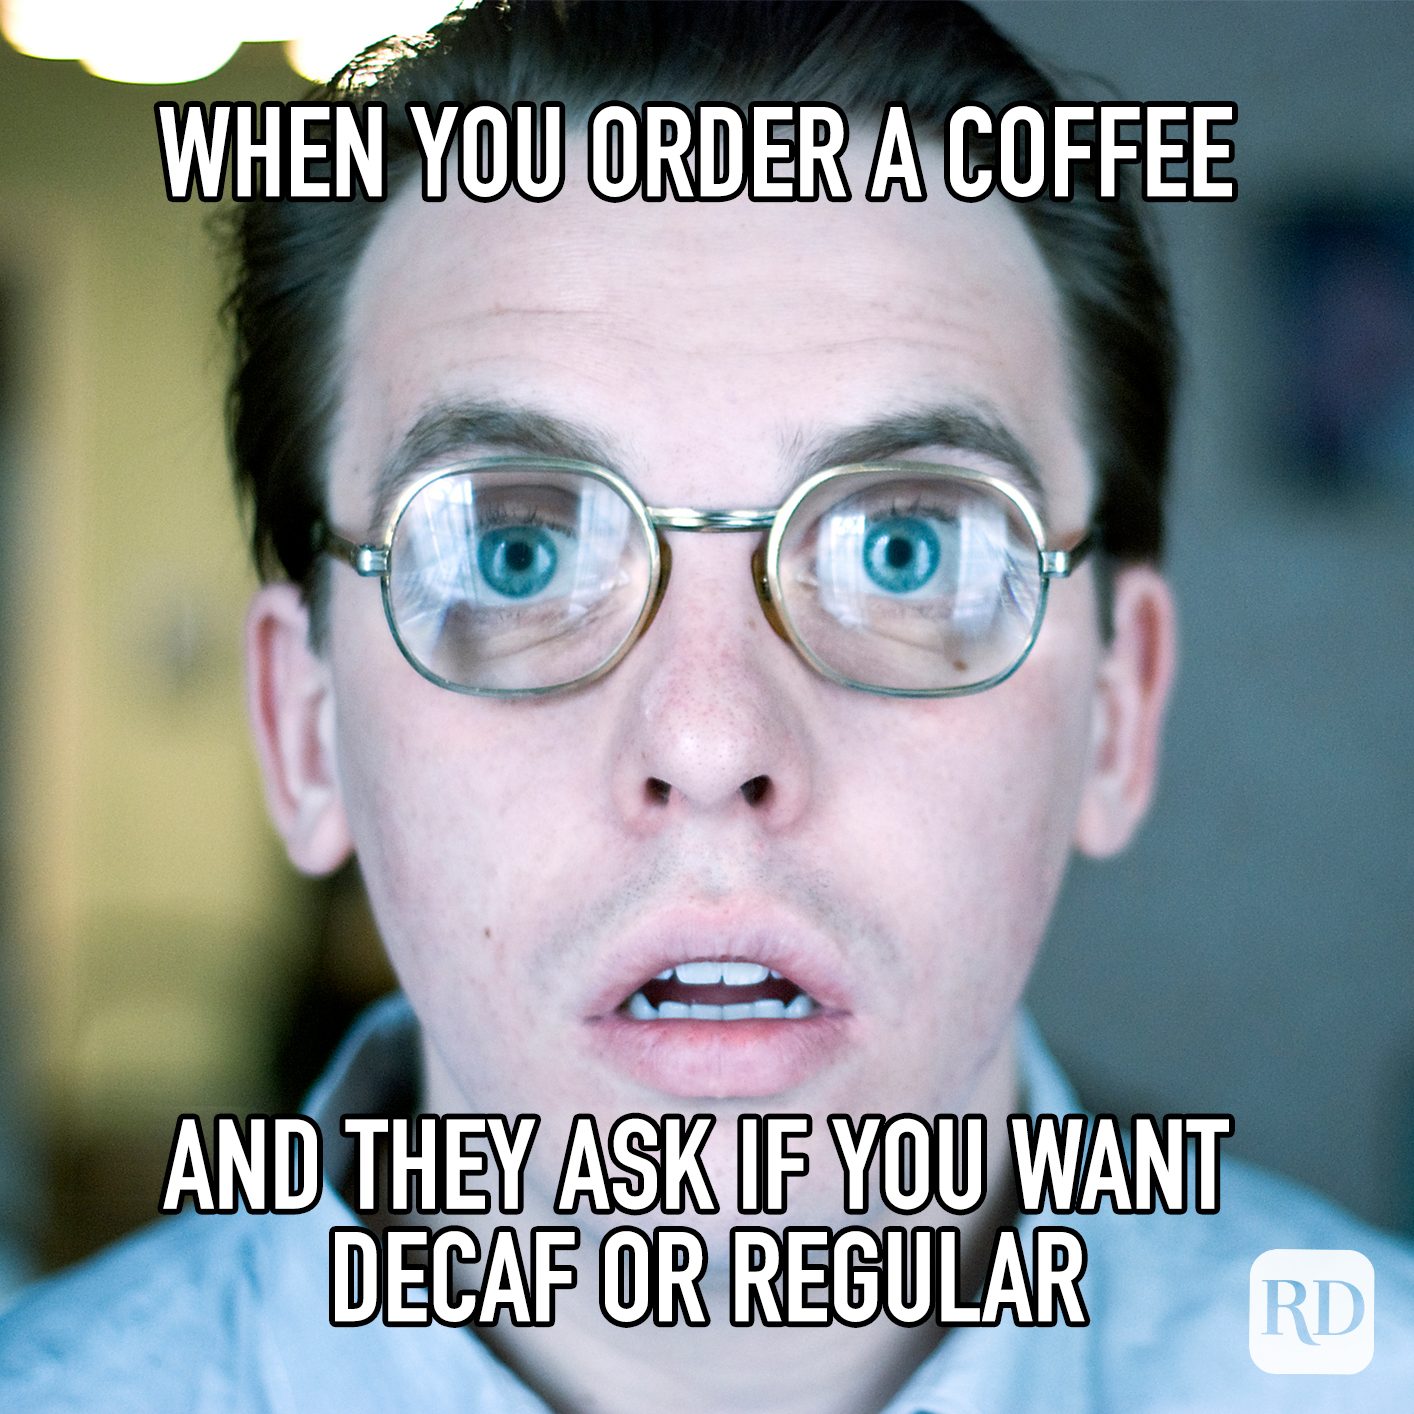 When You Order A Coffee And They Ask If You Want Decaf Or Regular meme text over image of man looking dumbfounded